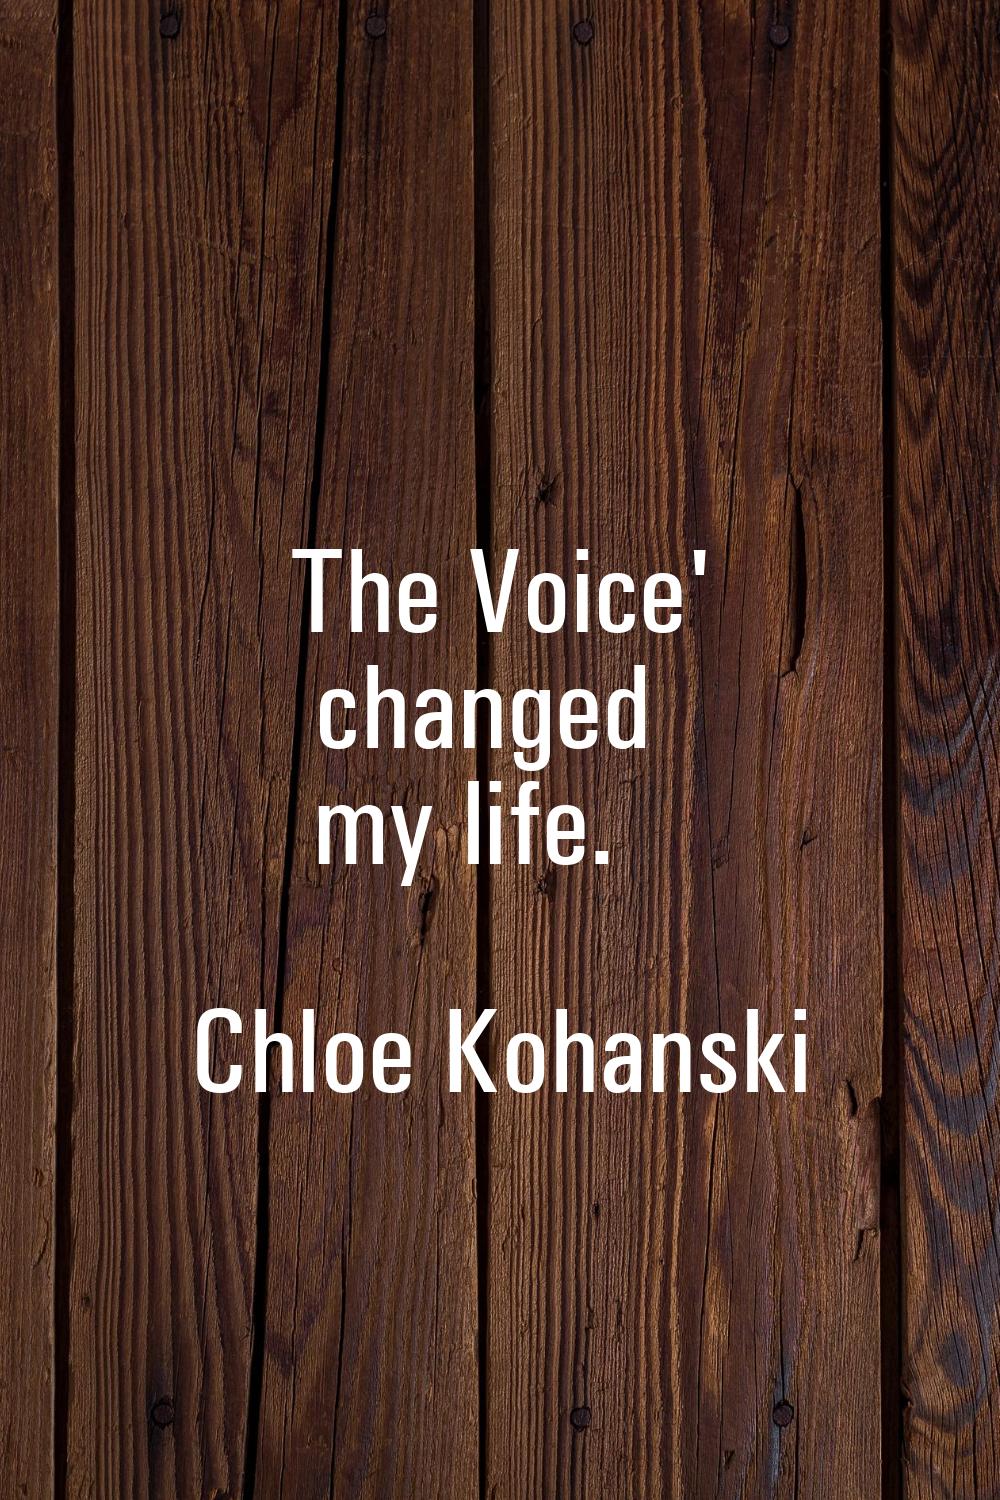 The Voice' changed my life.